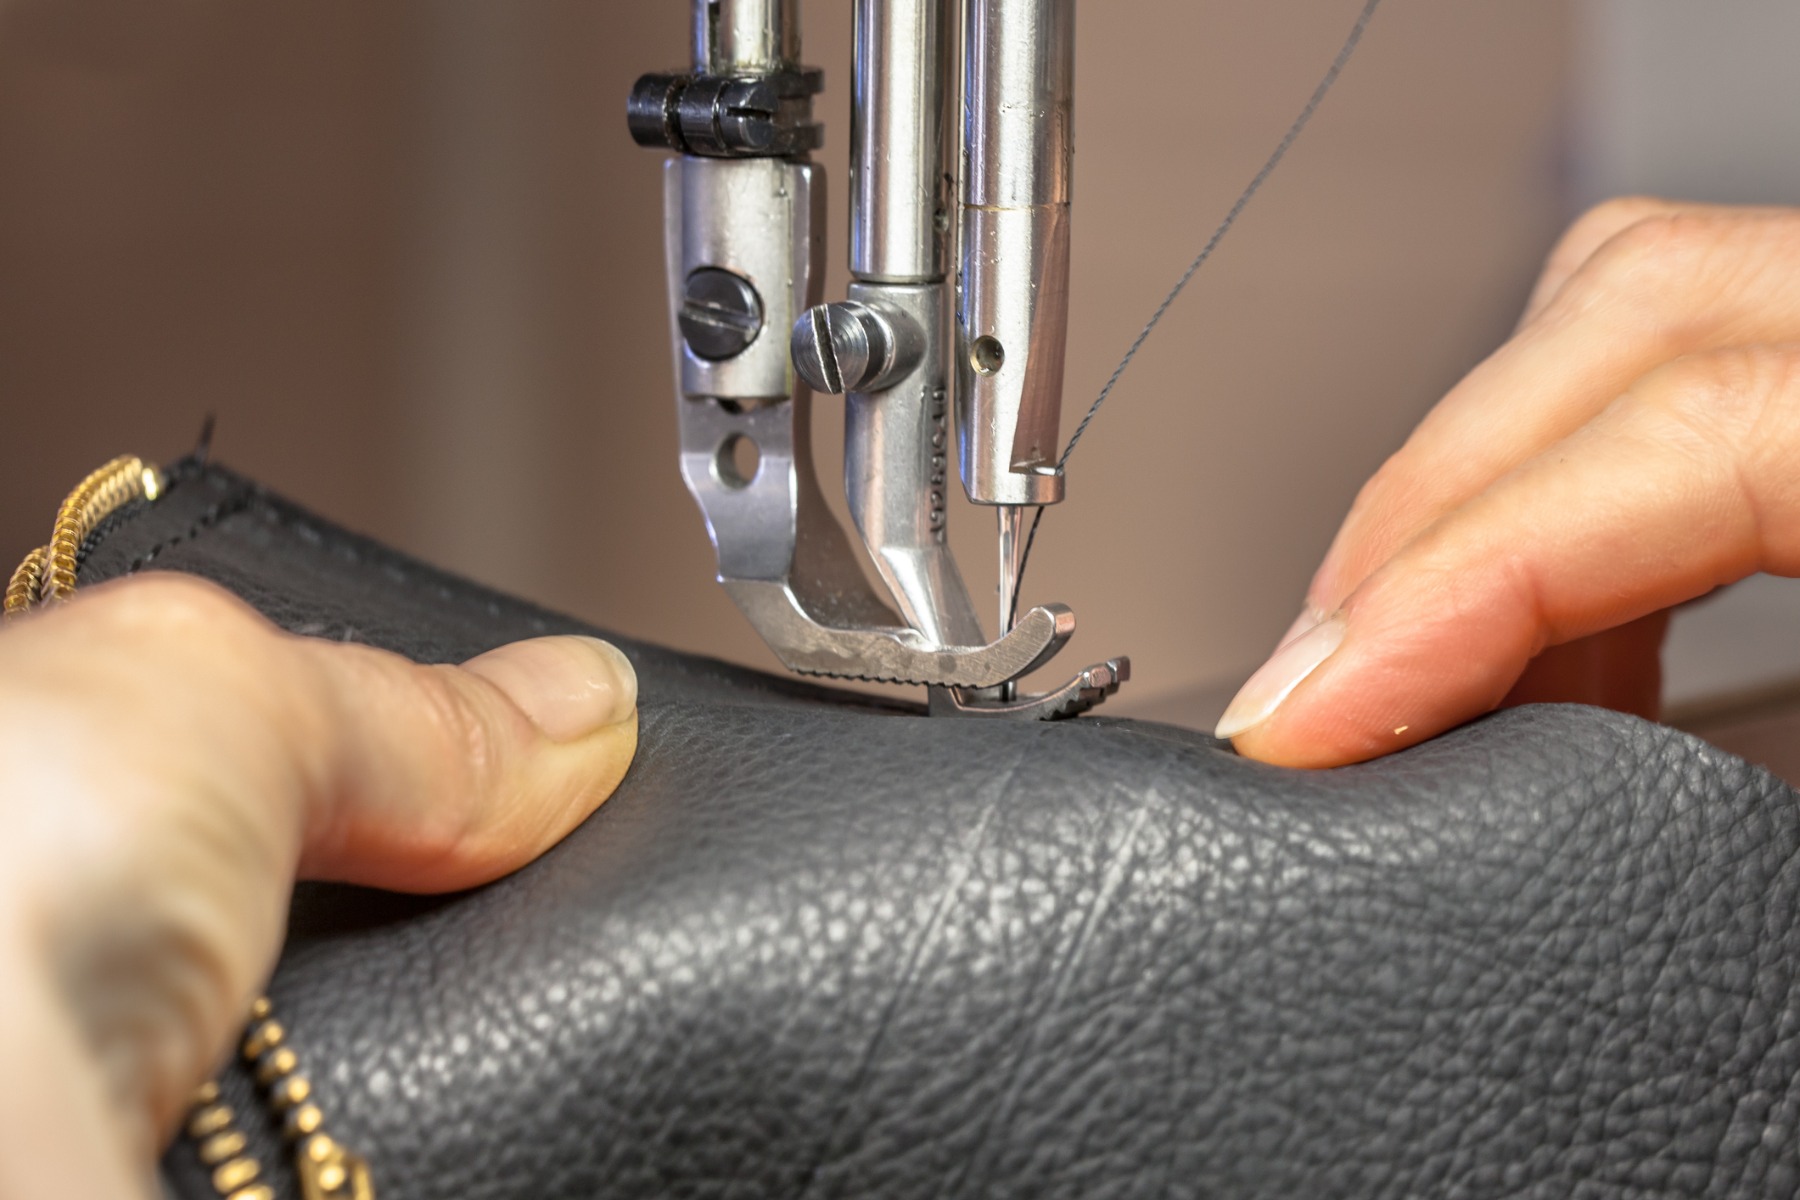 an example of the care needed to sew leather together